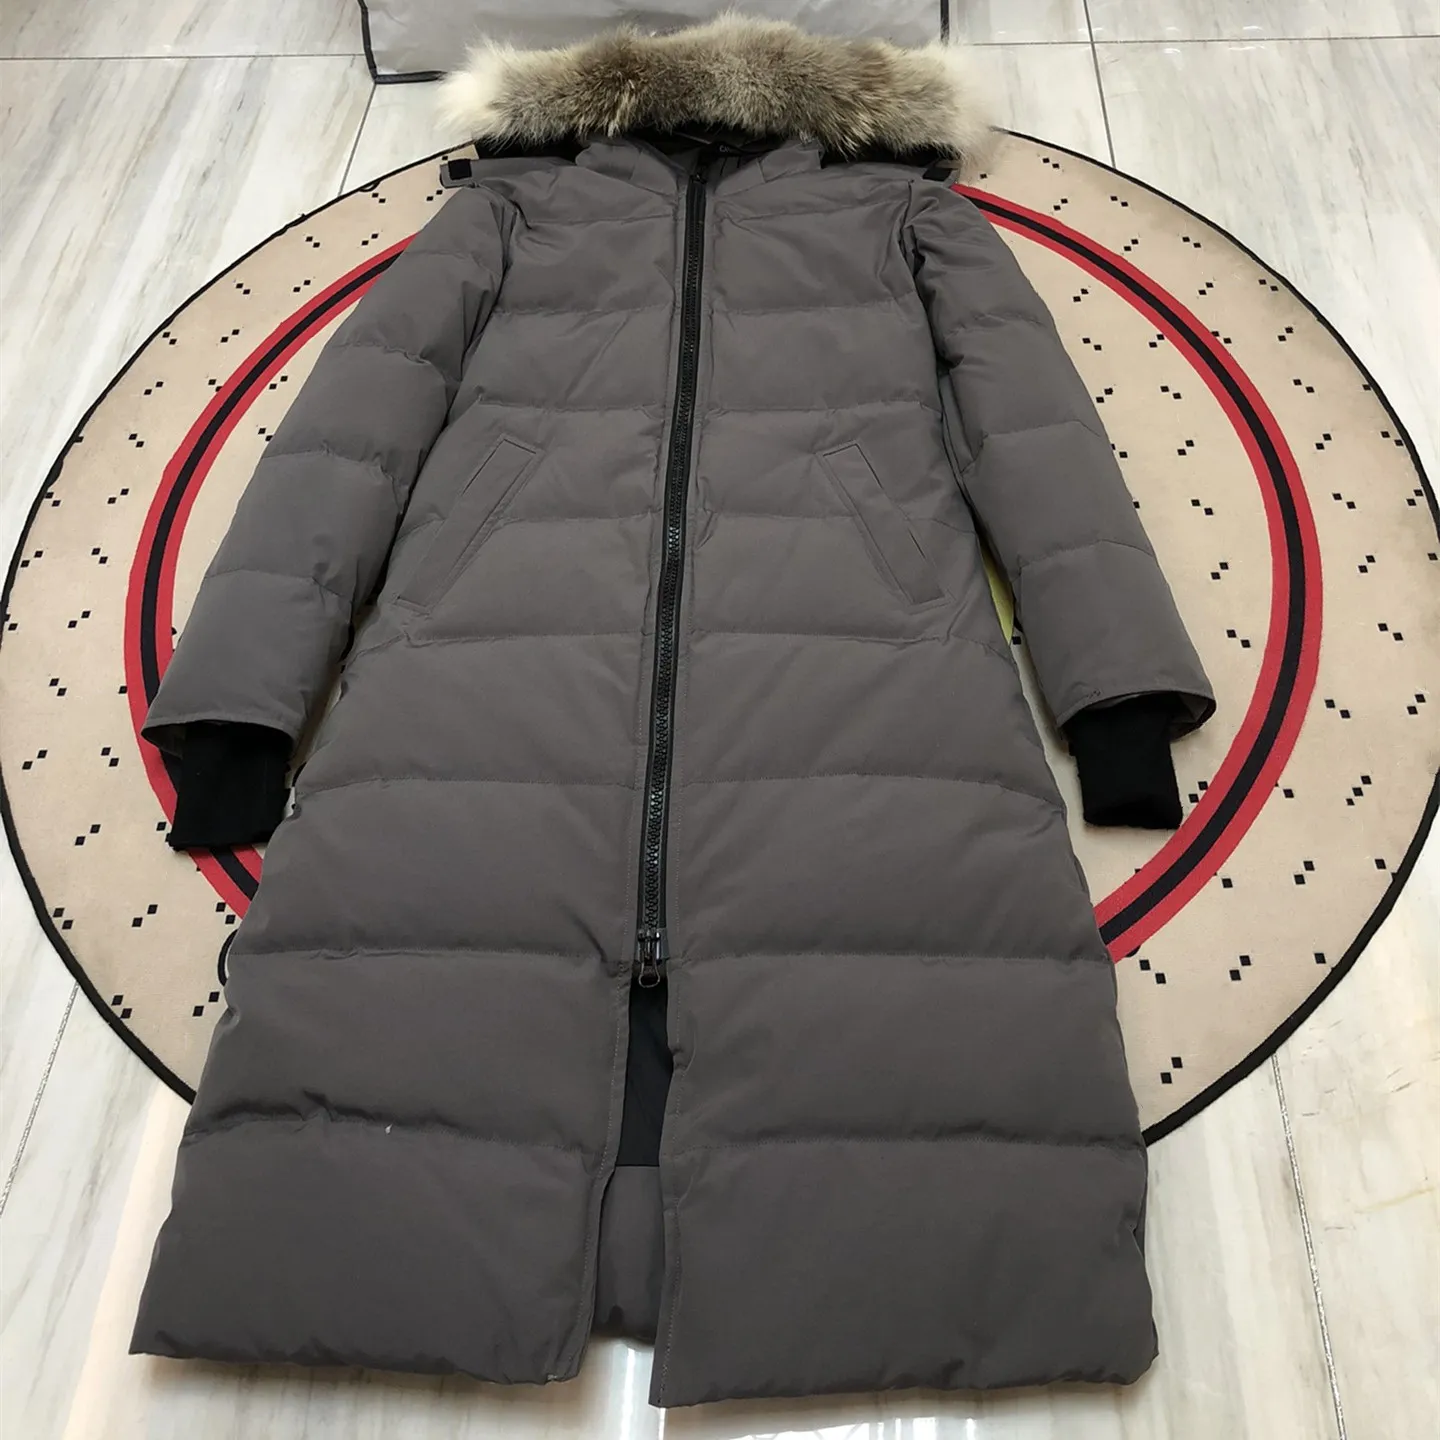 Men's Down Parkas Womens jacket black puffer winter coats classic outdoor cold and warm thick with Long trench coat quality durable streetwear fur collar jackets